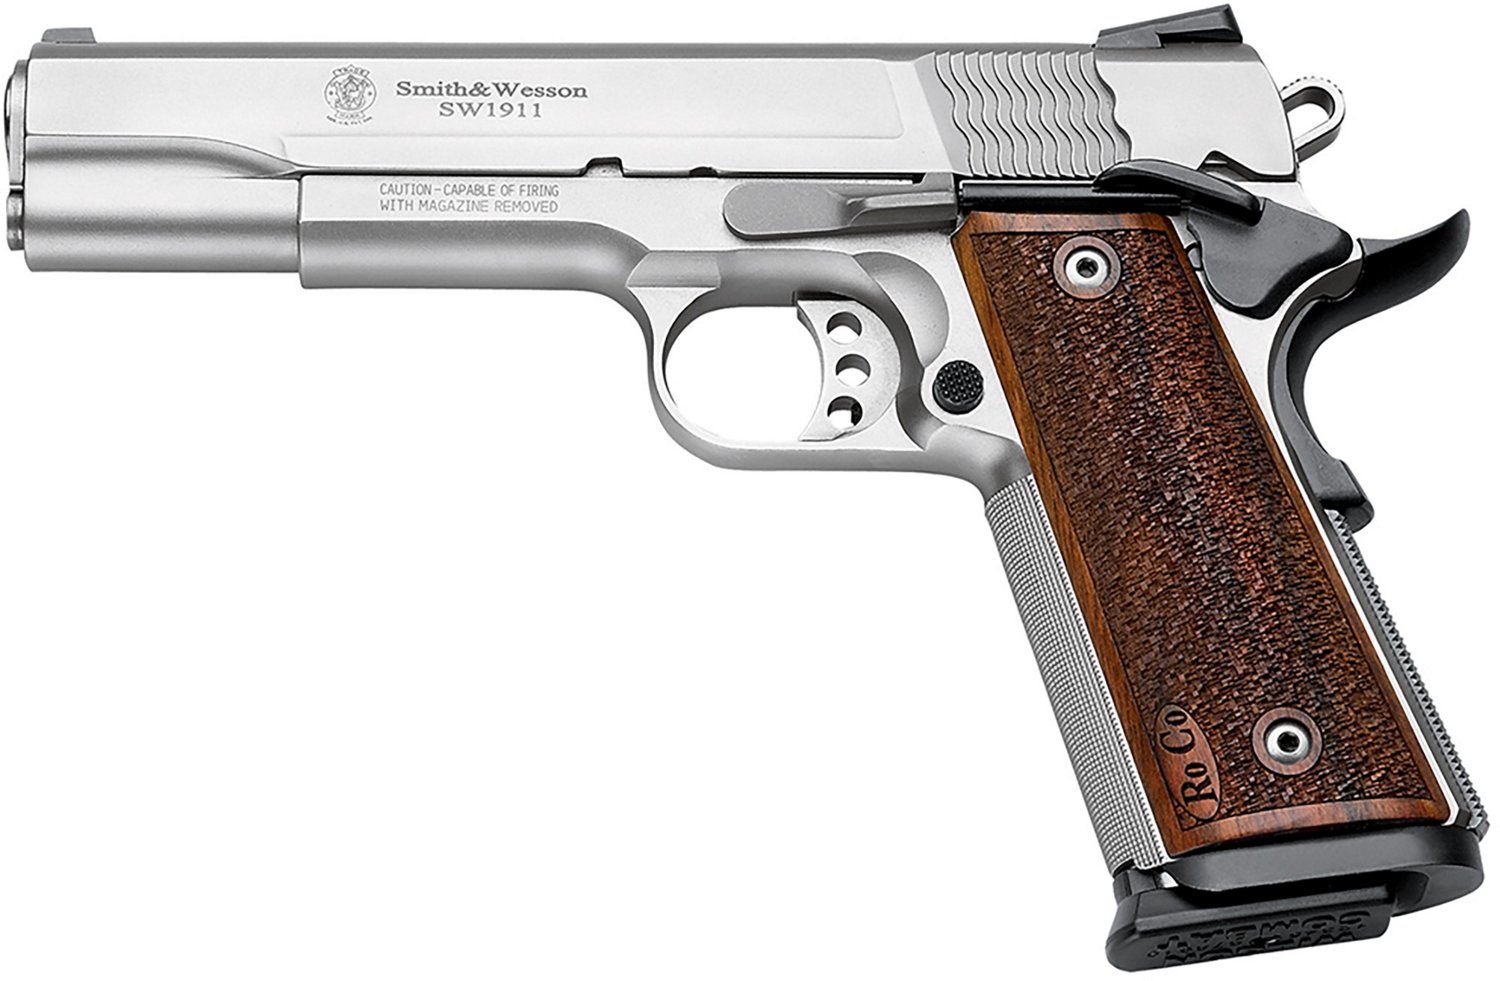 Smith & Wesson 1911 Performance Center Pro 9mm Pistol | Academy